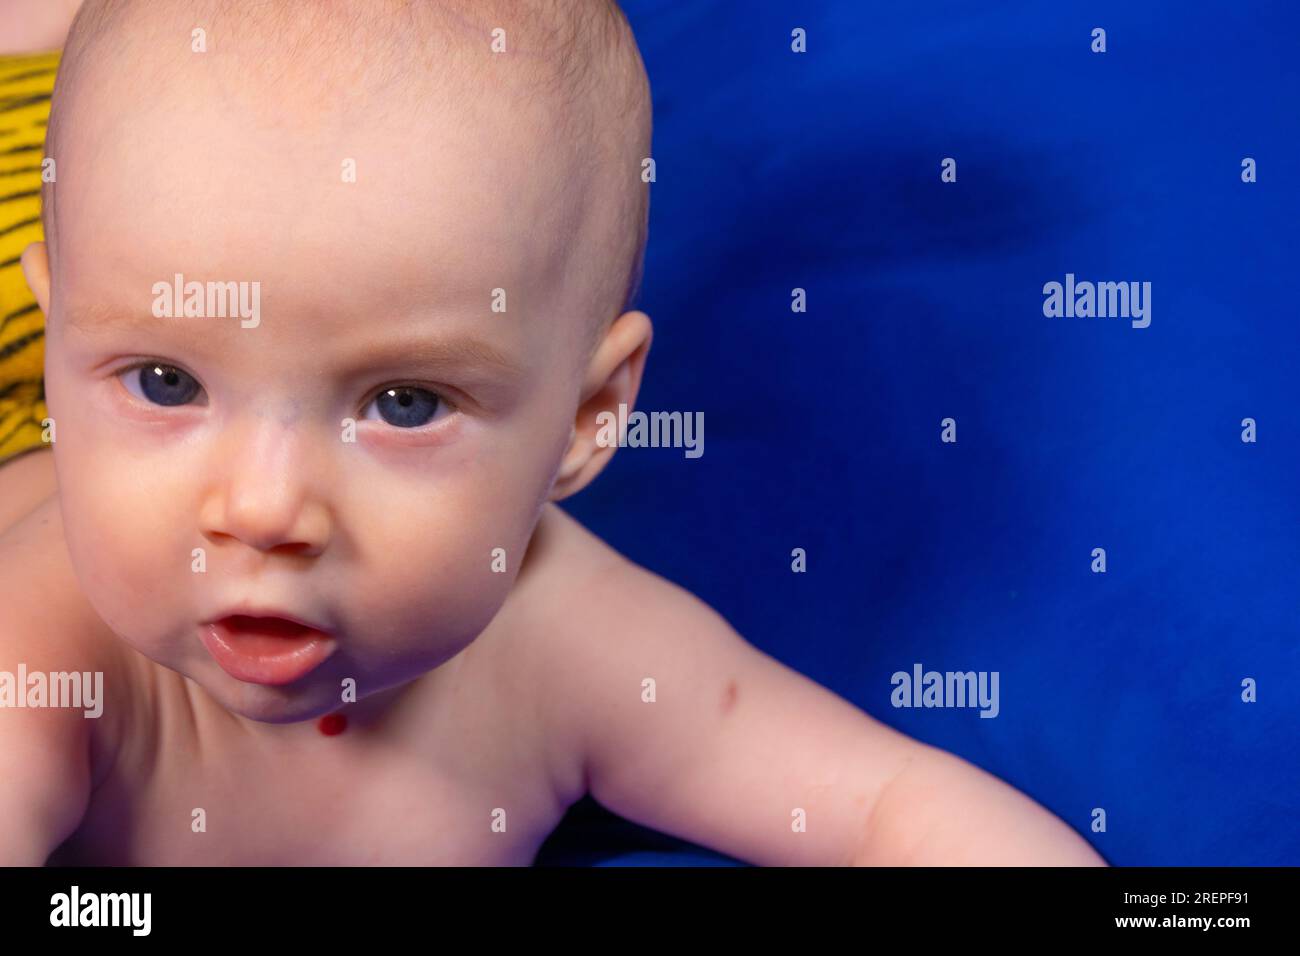 a baby on a blue background with a wooden rattle Stock Photo